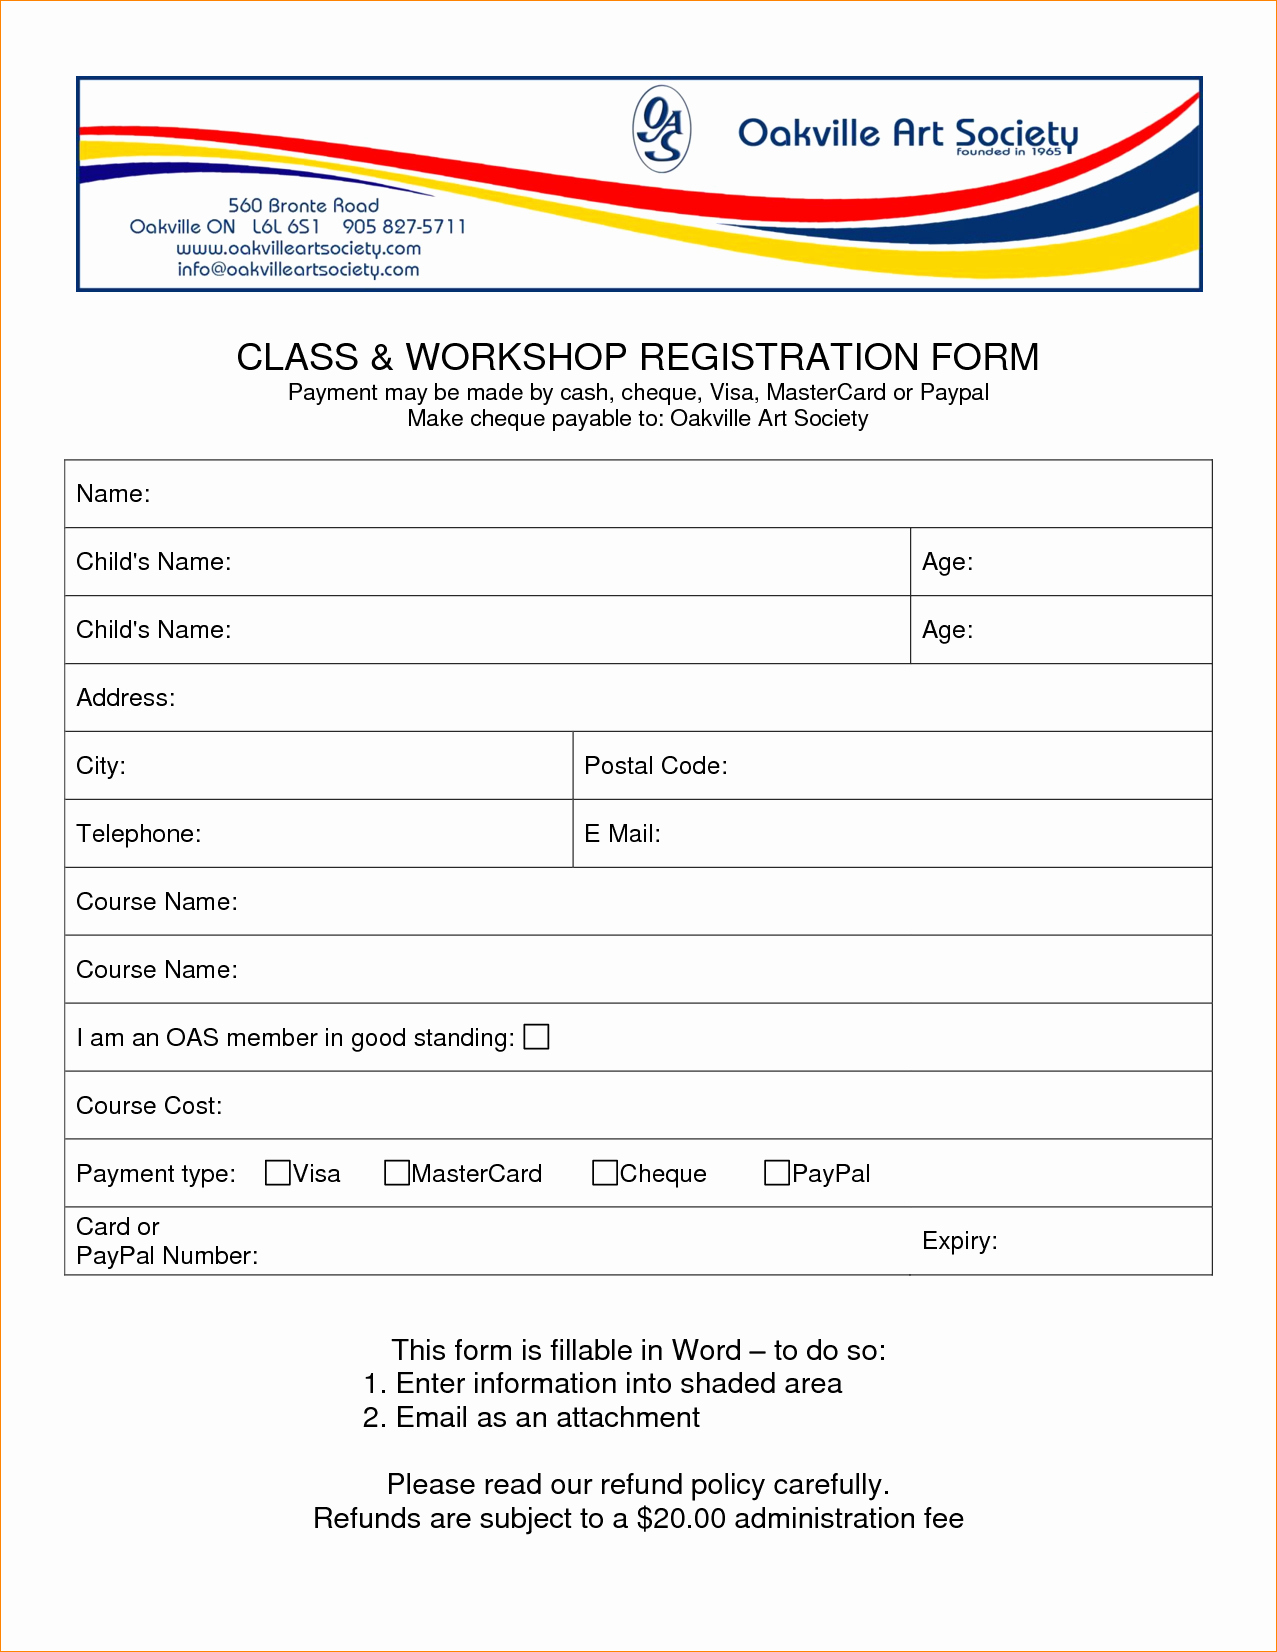 Conference Registration form Template Word Fresh event Registration form Template Word Bamboodownunder